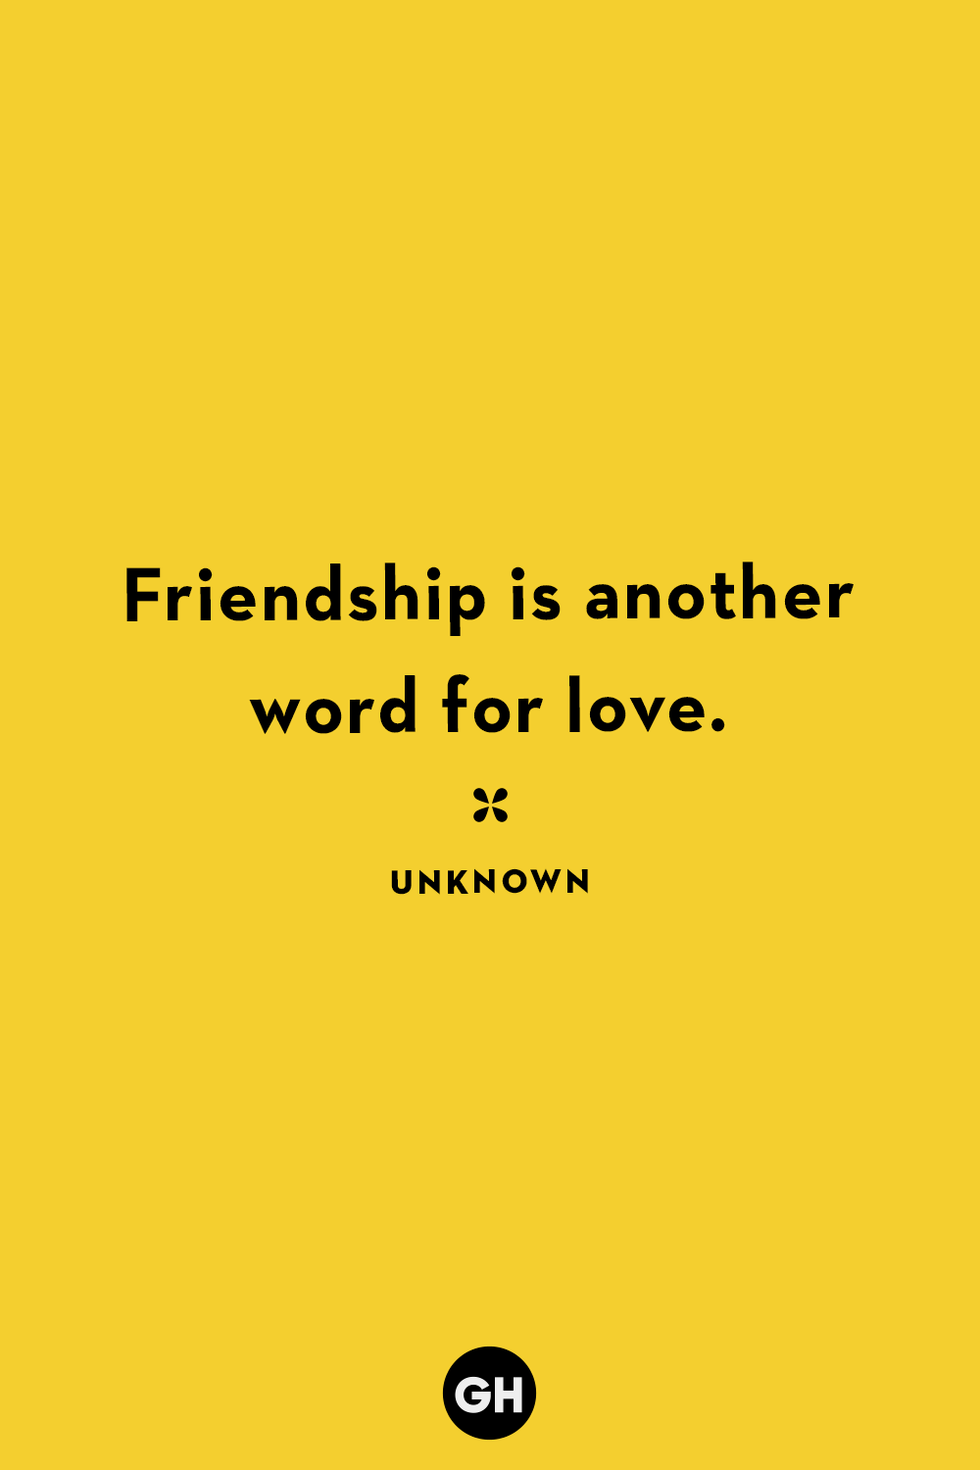 friendship-quotes-unknown-1-1660939634 image